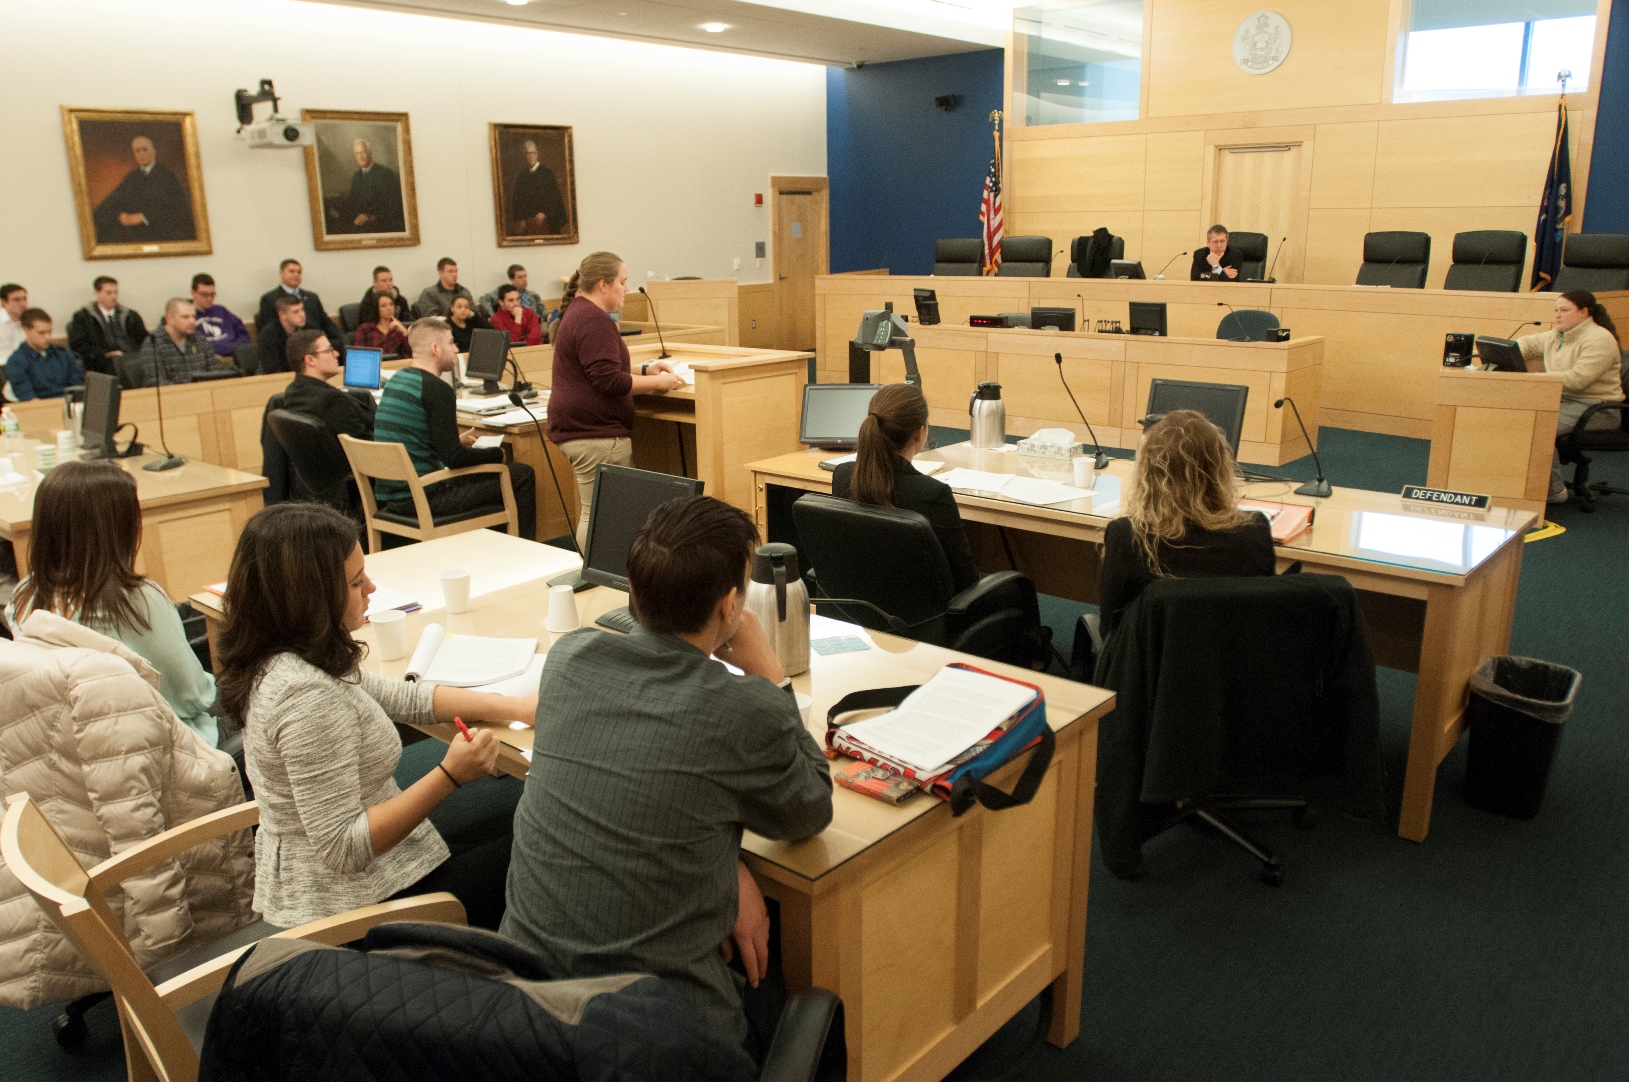 Husson University's School of Legal Studies emphasize experiential learning, like this mock trial at the Penobscot Judicial Center.